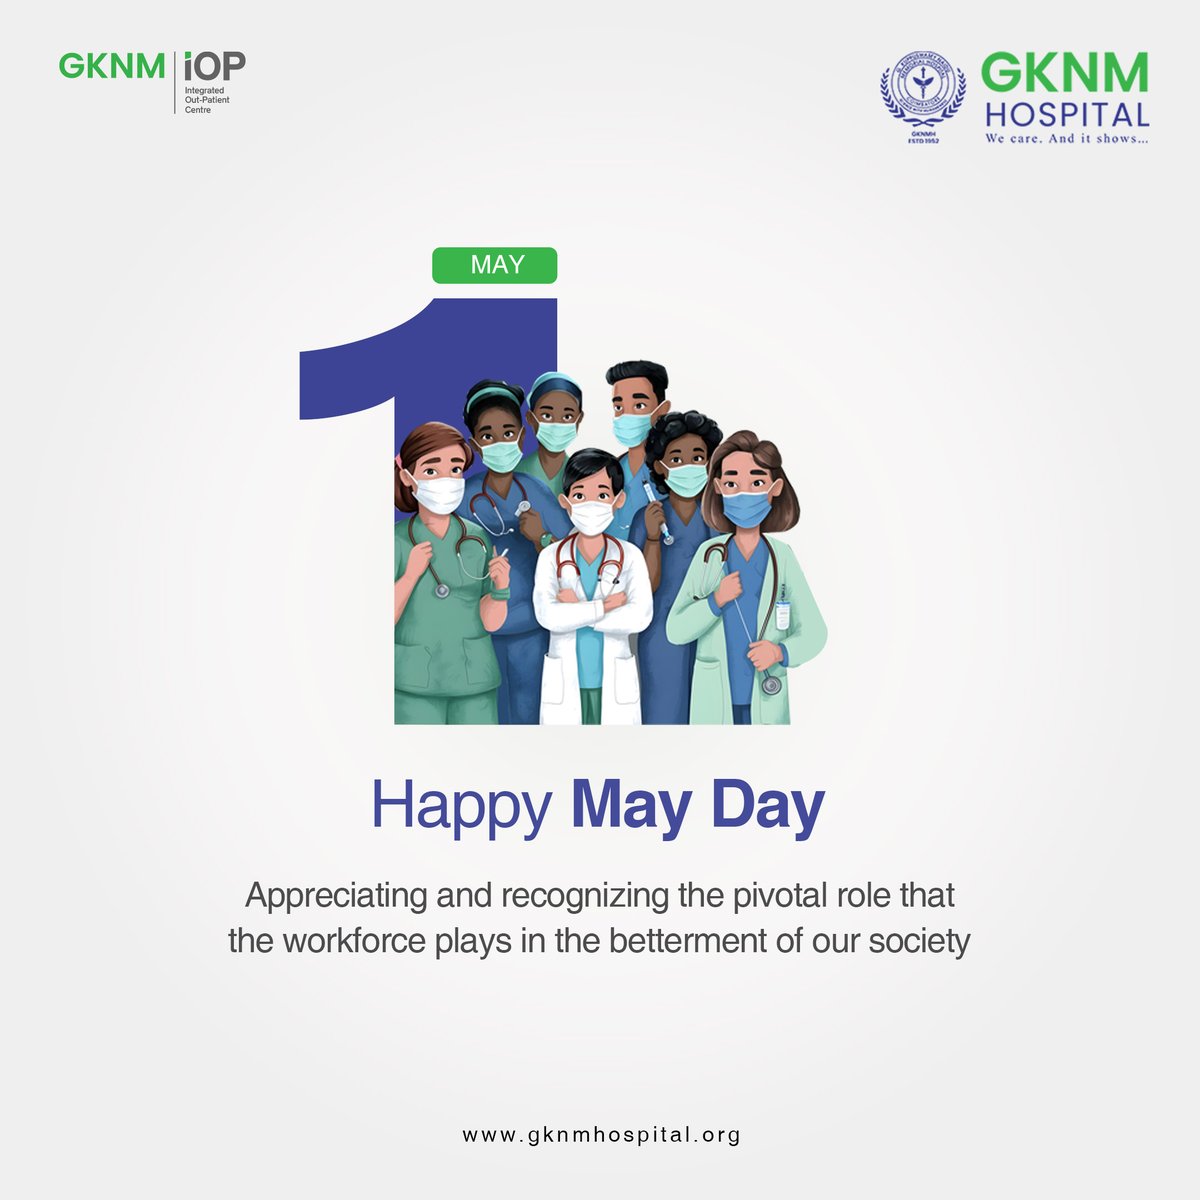 Today, let's appreciate and recognize the important role that the workforce plays in the upliftment of our societies and economies. #MayDay #LaboursDay #1stMay #WorkersDay #InternationalWorkersDay #GKNM #GKNMH #GKNMHospital #GKNMiOP